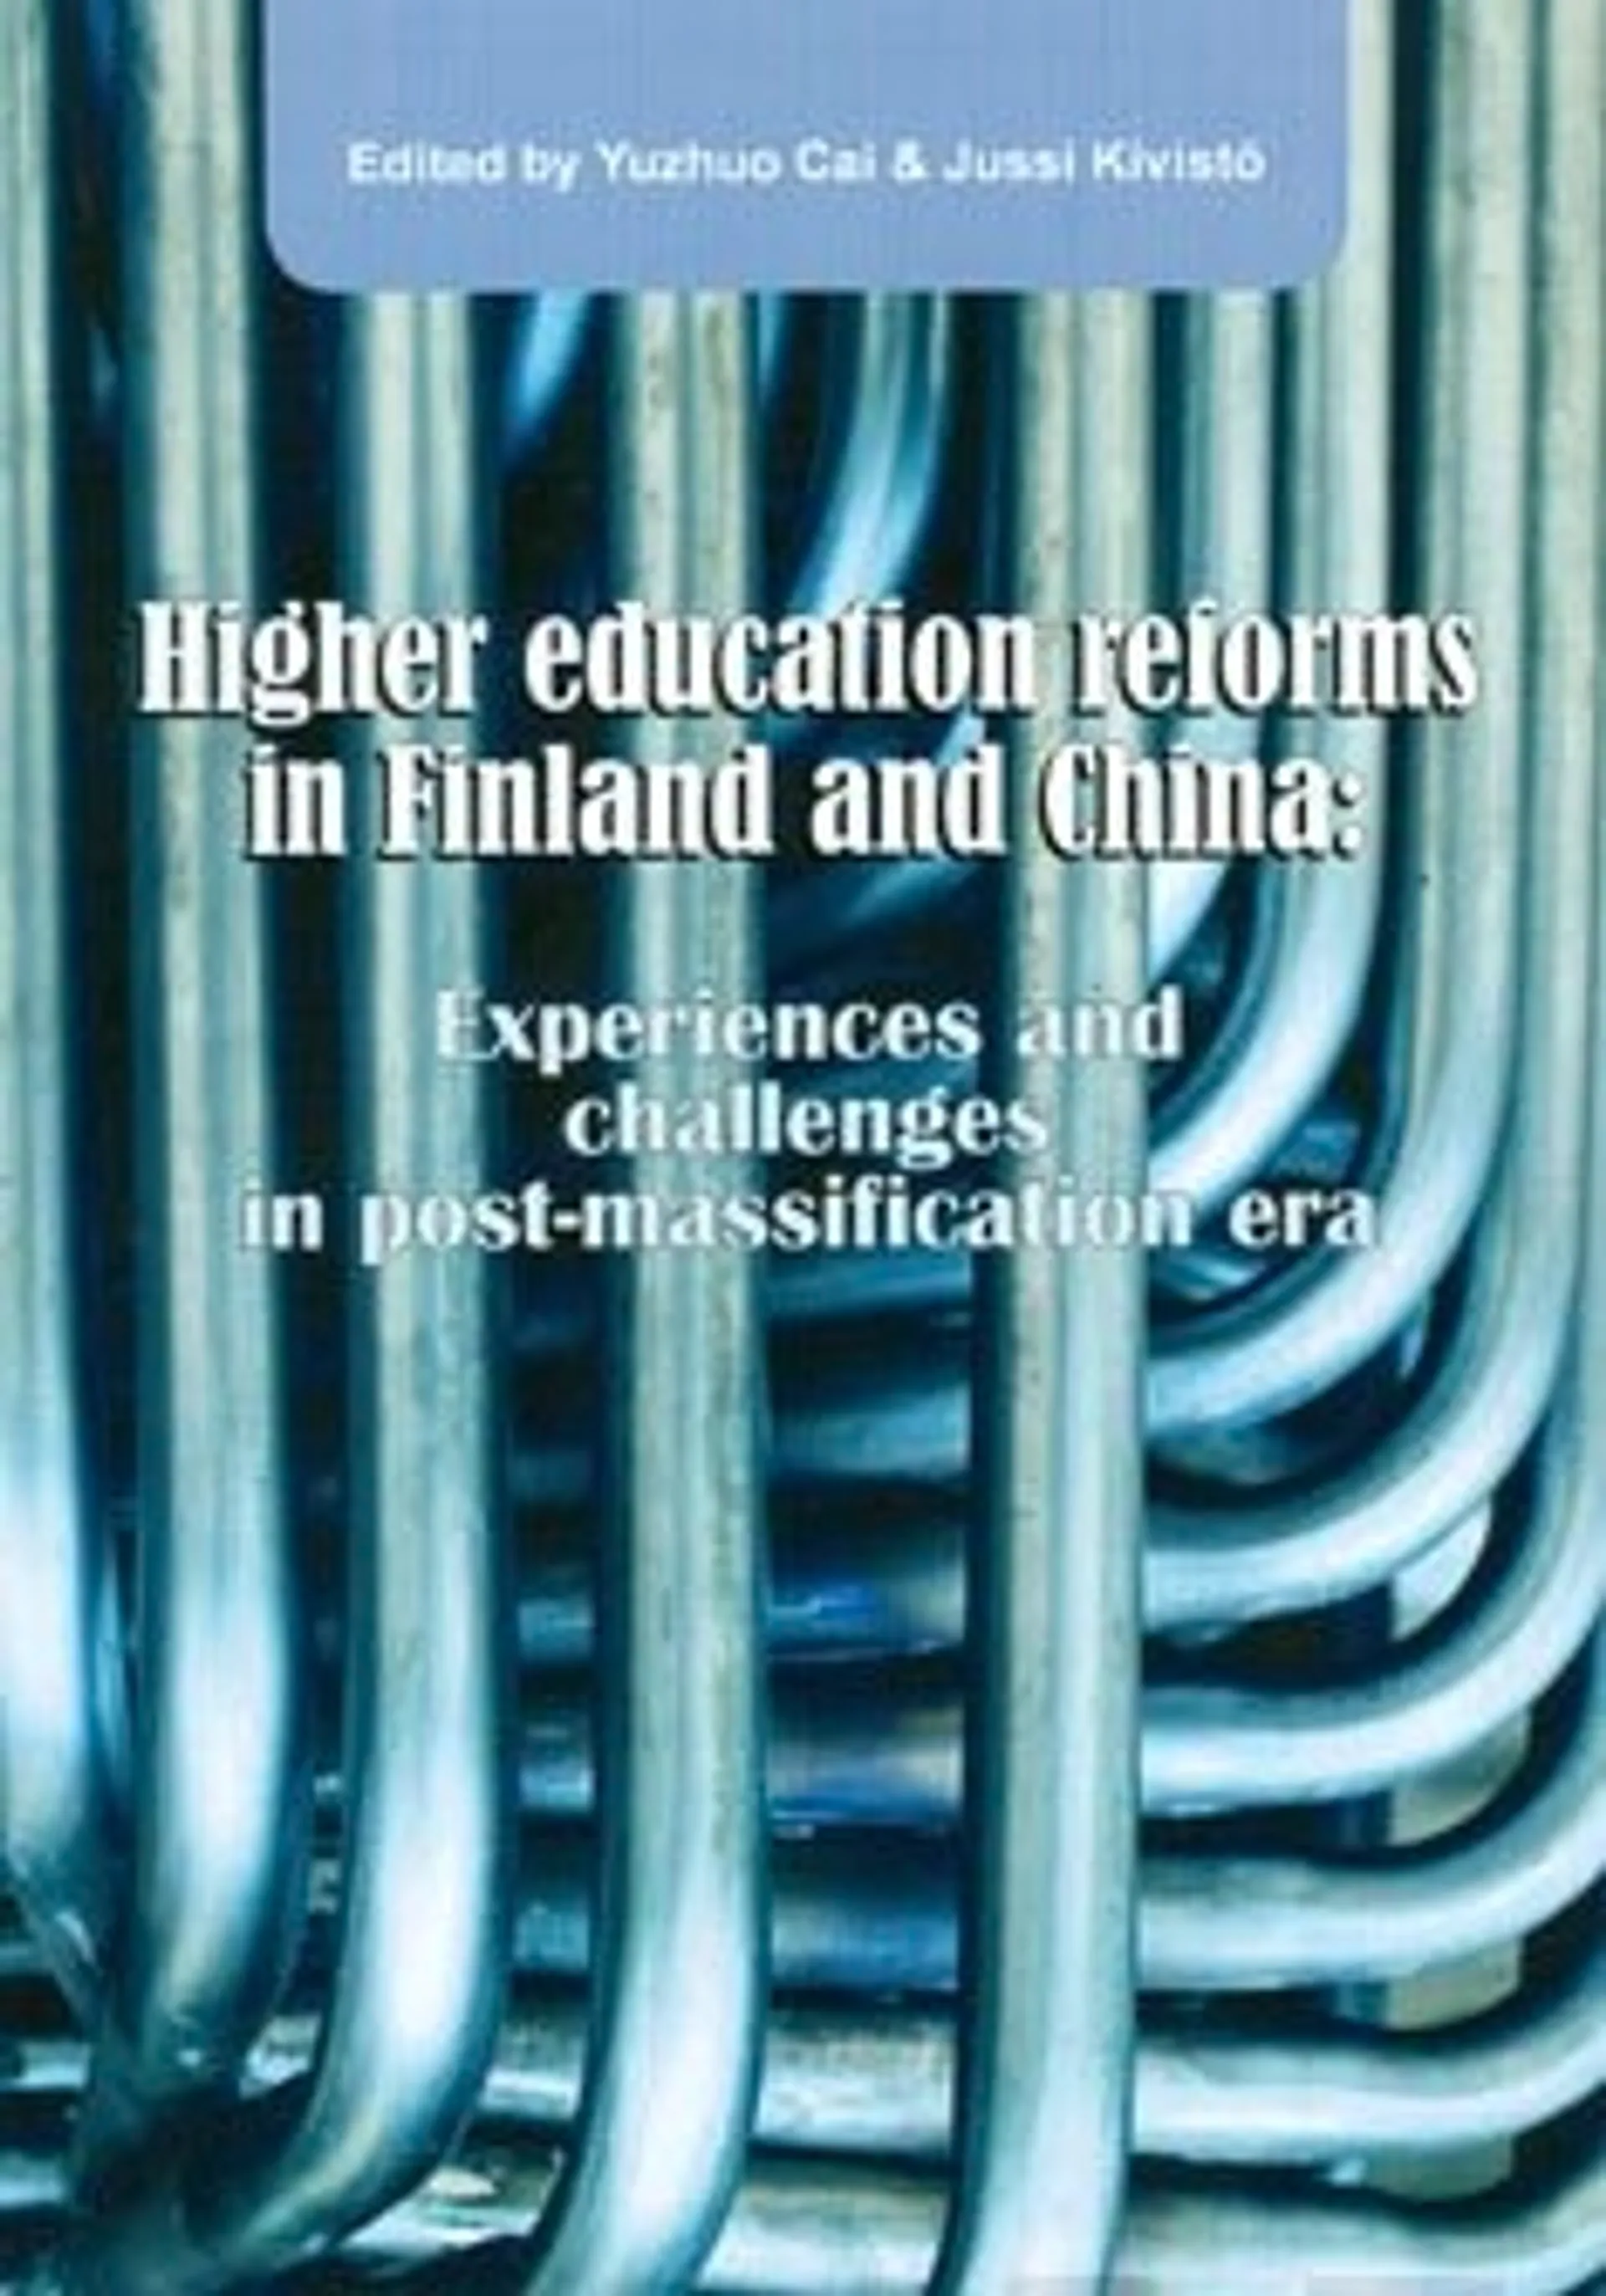 Higher education reforms in Finland and China